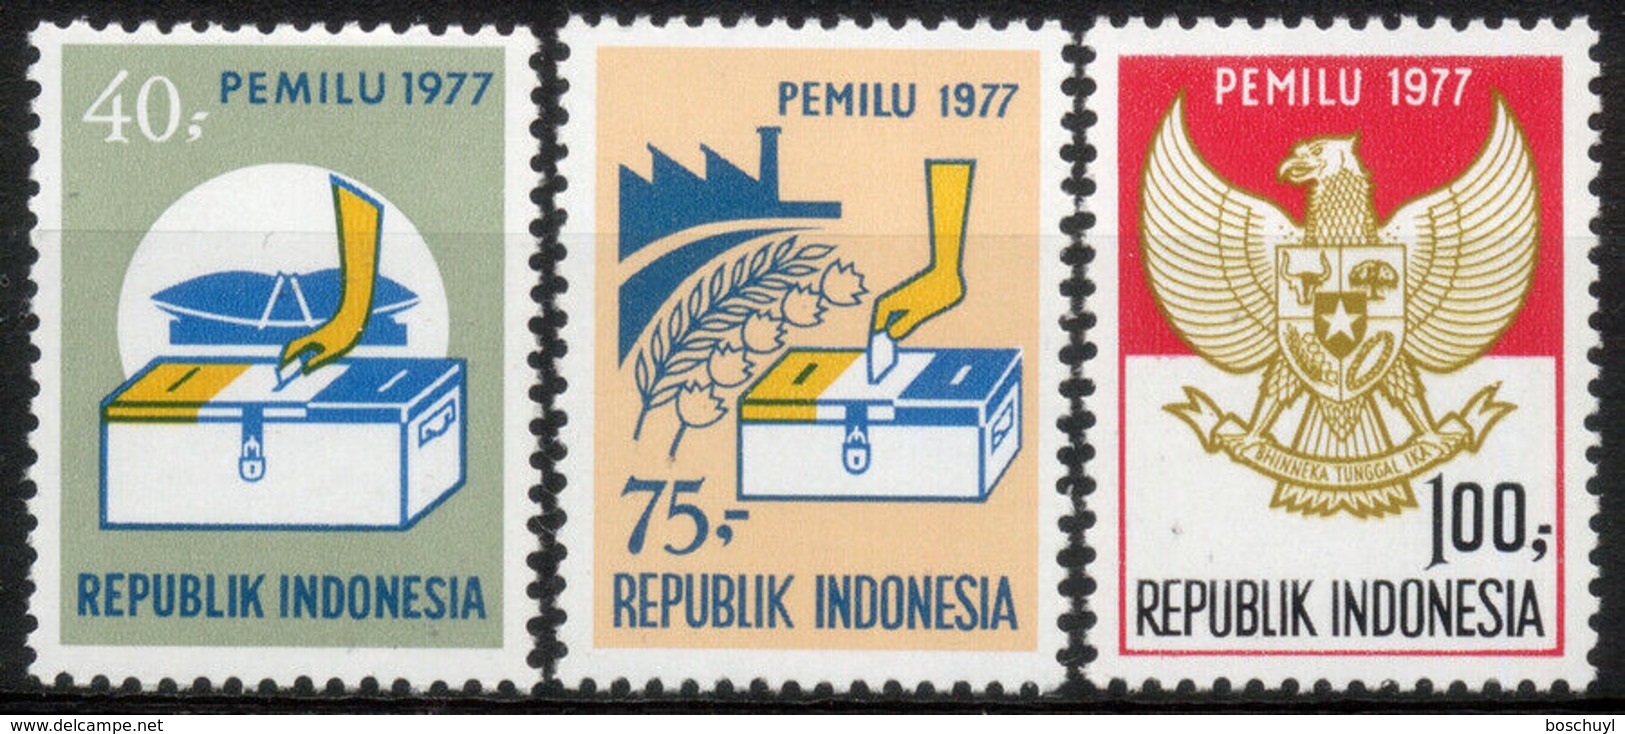 Indonesia, 1977, National Elections, MNH, Michel 860-862 - Indonésie